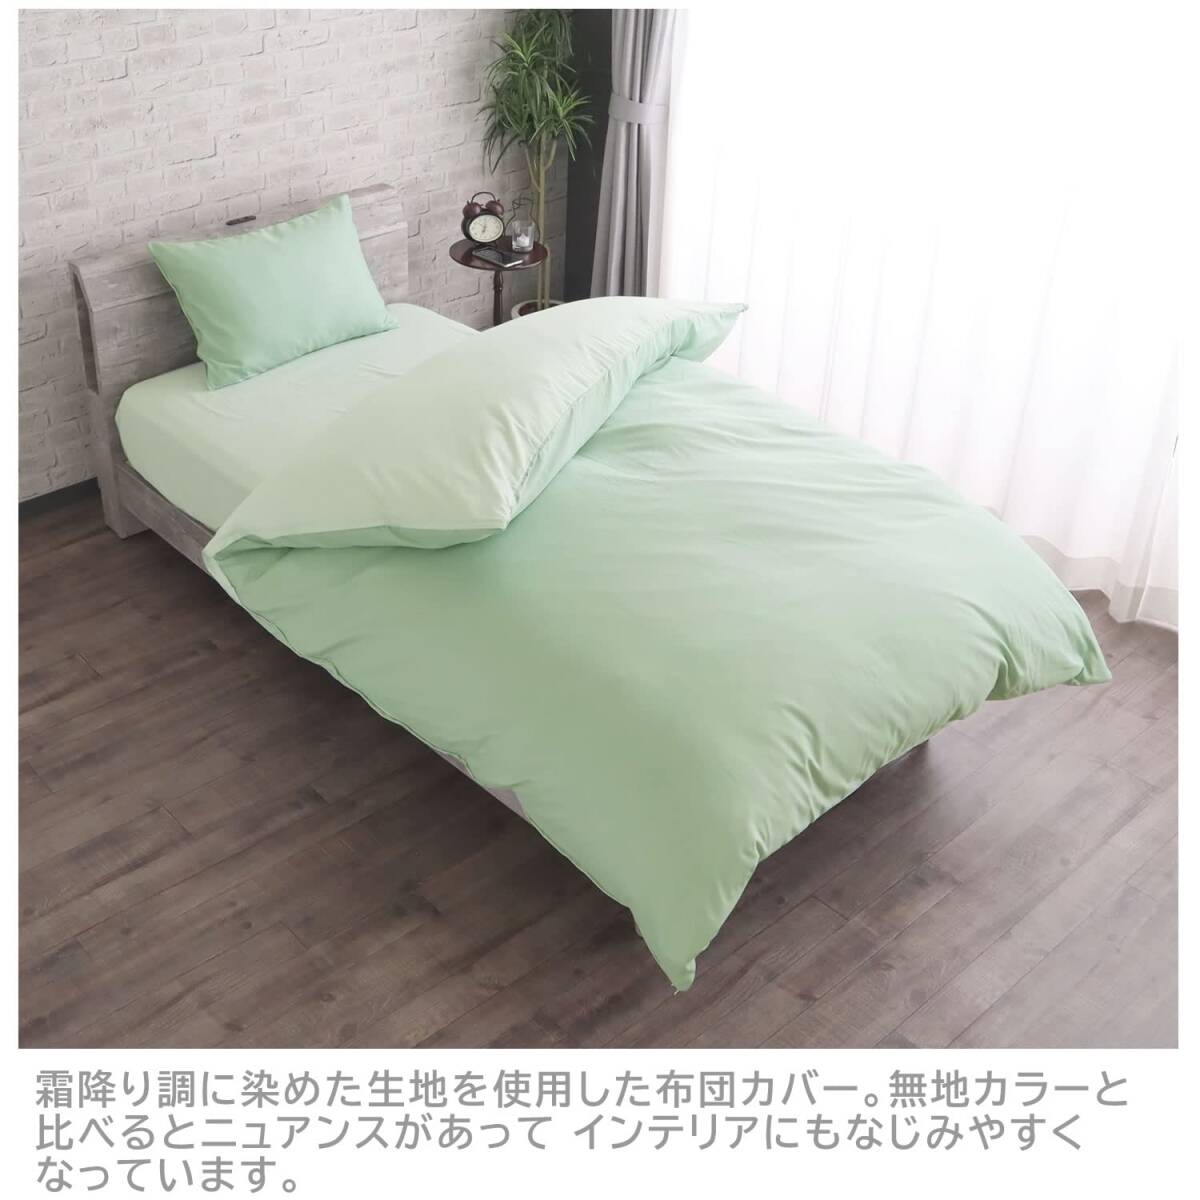 me Lee Night (Merry Night) both side fastener . futon cover ... style green single long approximately 150×210cm attaching and detaching easy .